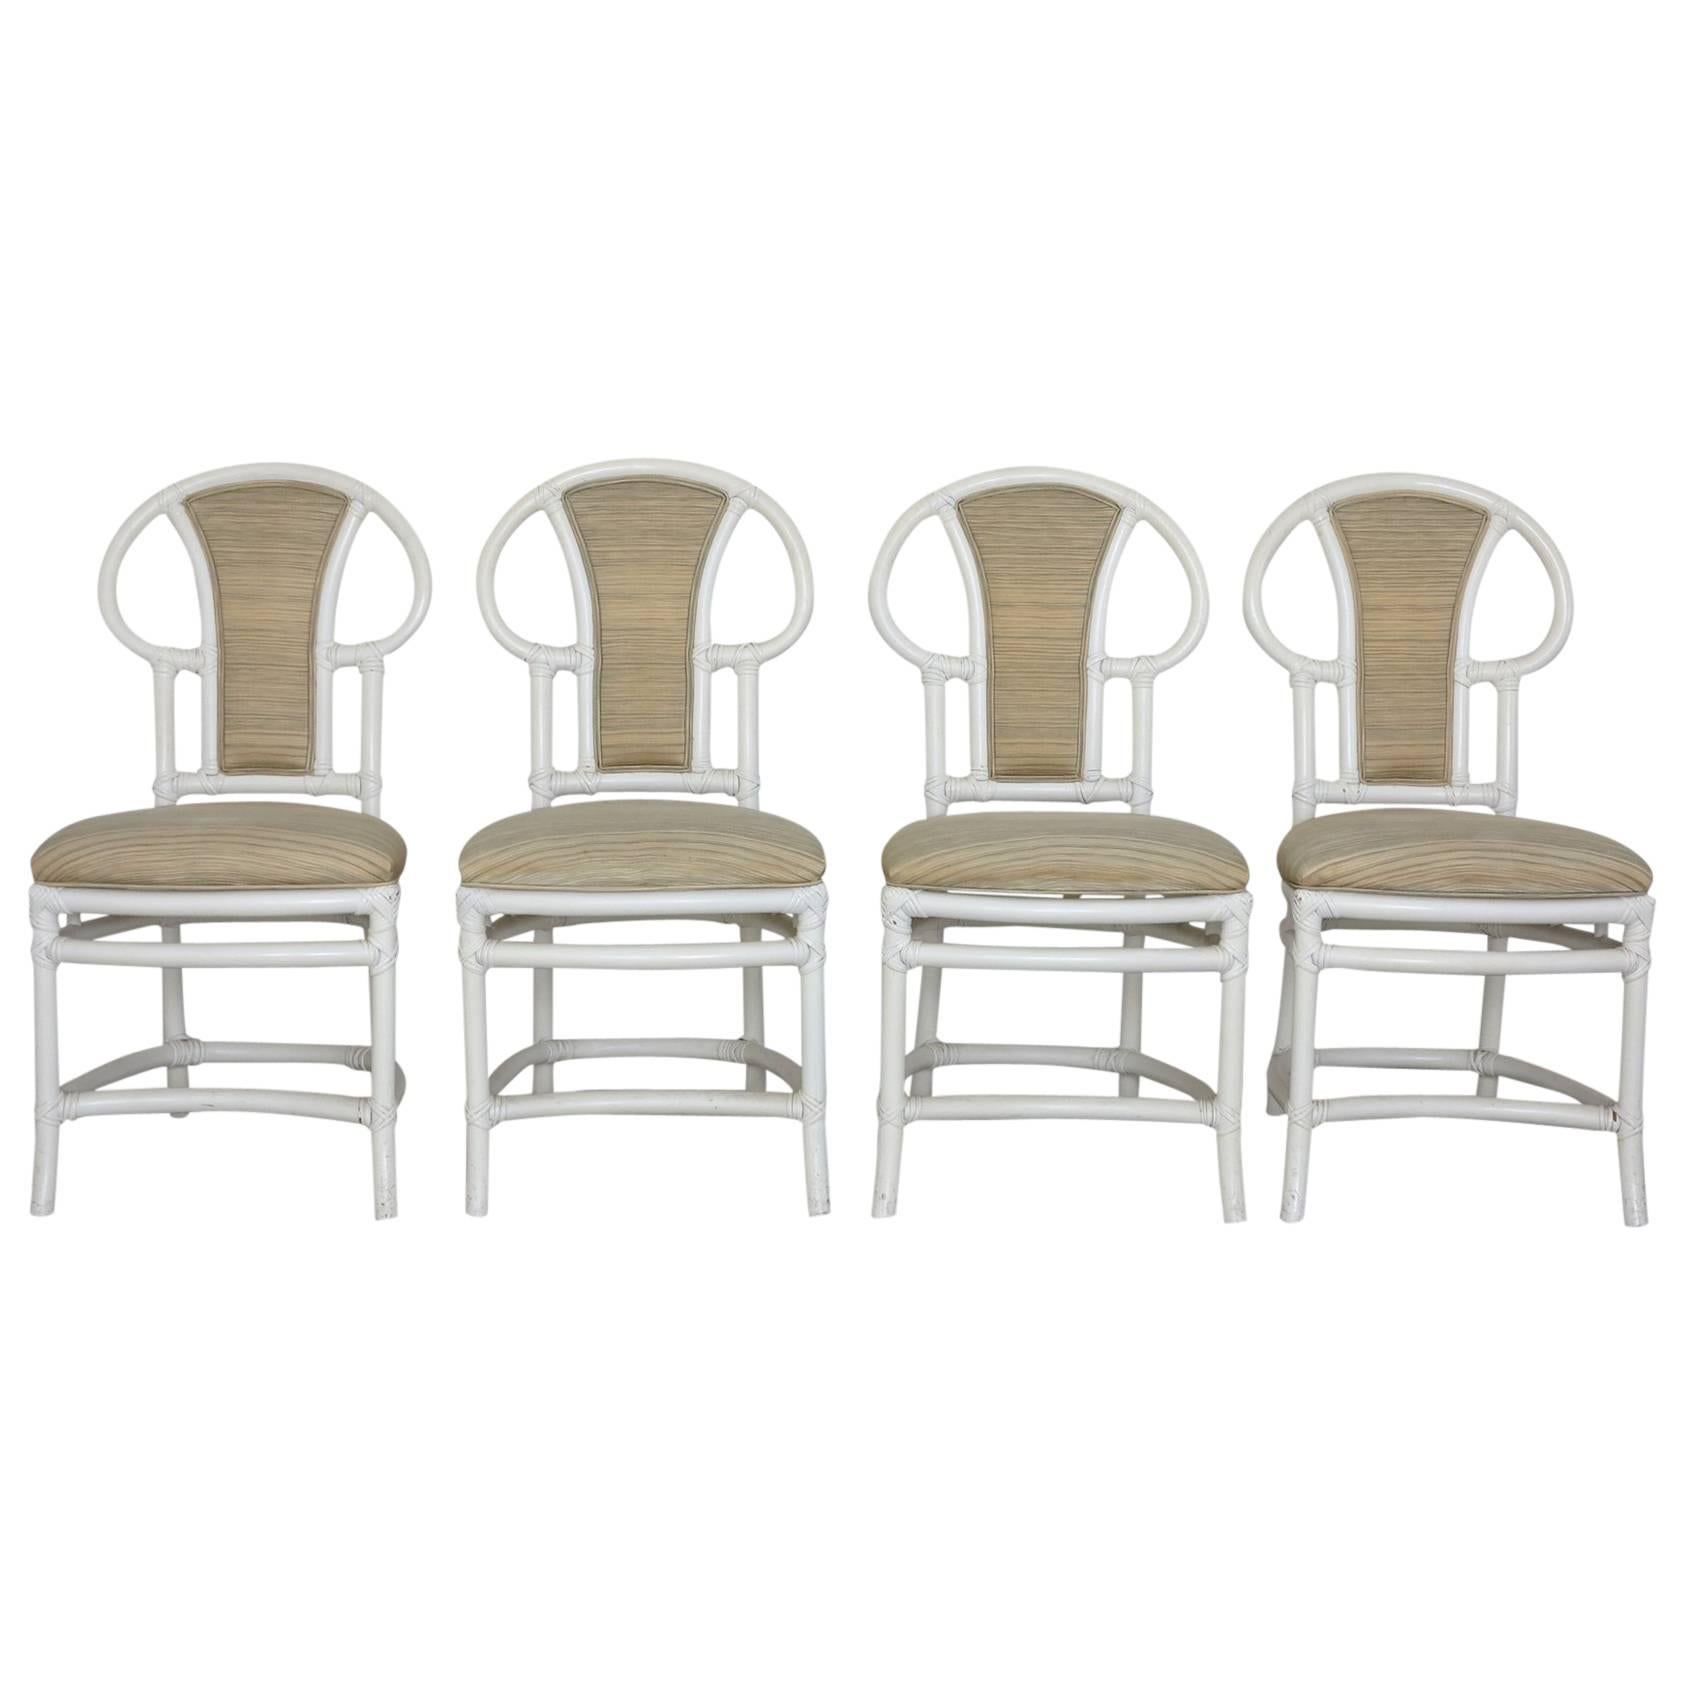 Four Vintage Rattan Dining Chairs Painted White